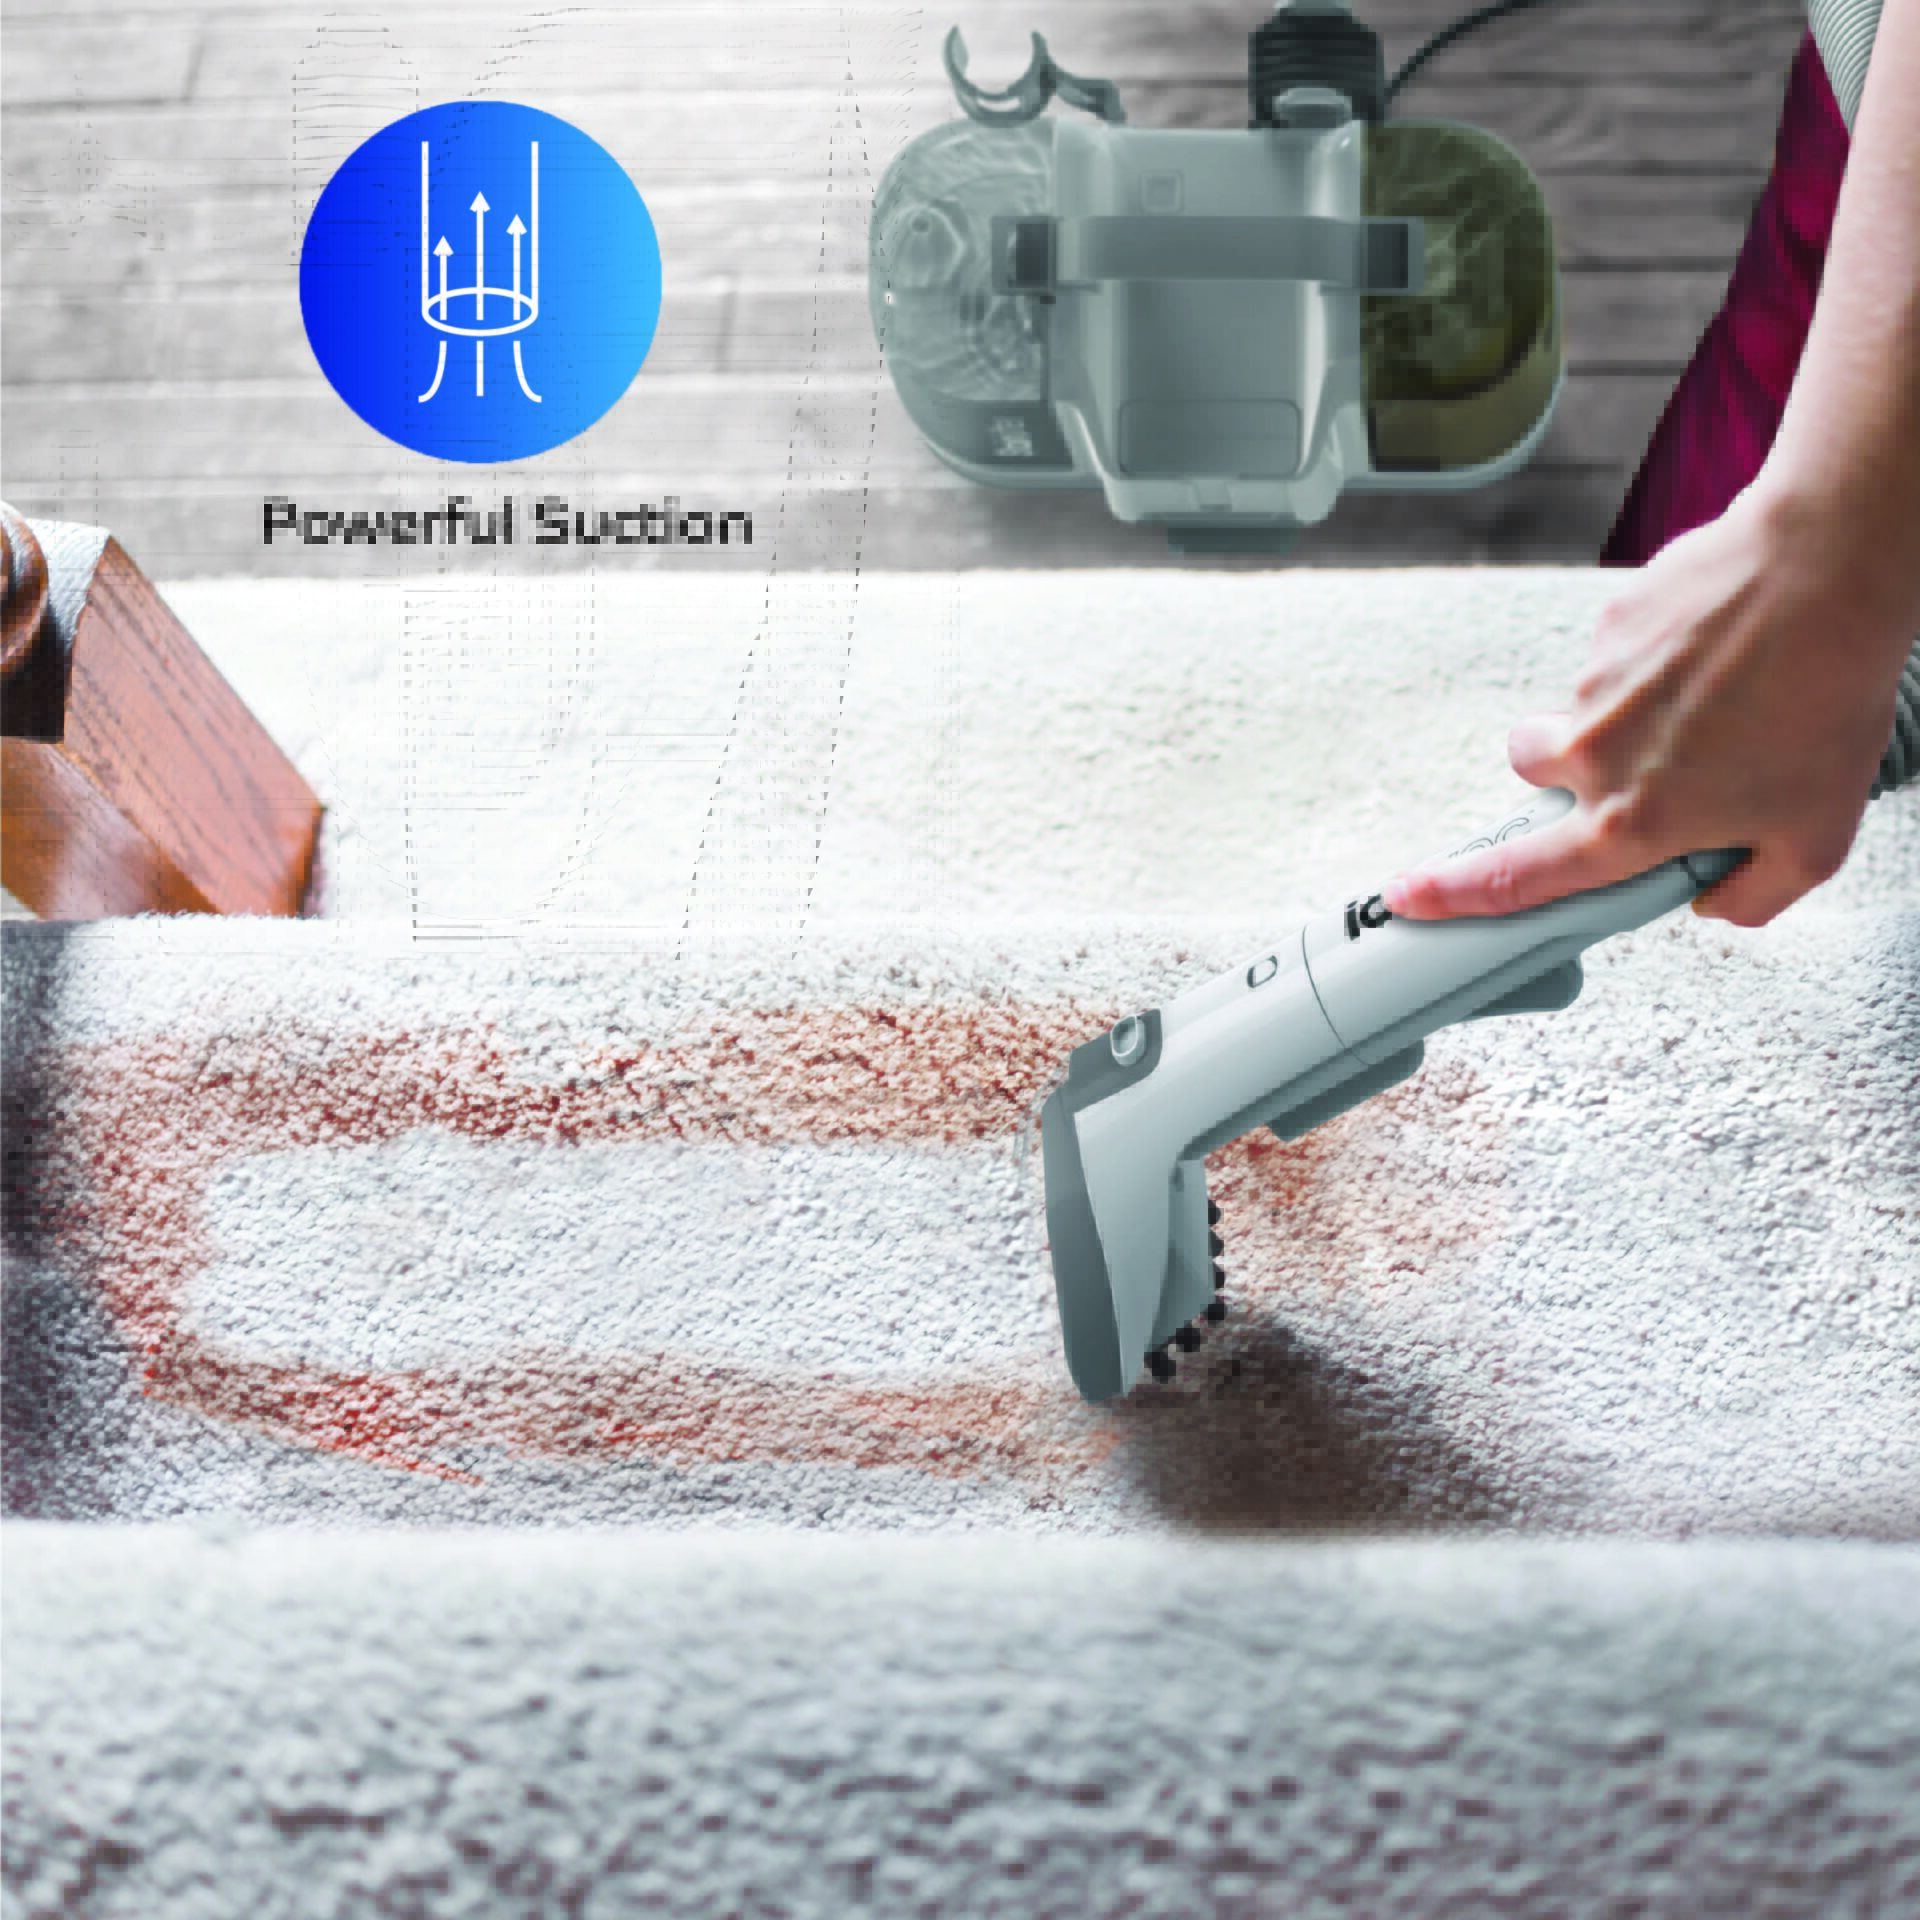 Tile & Grout Cleaning - Countertops & Floors - Carpet Care Plus - Ohio